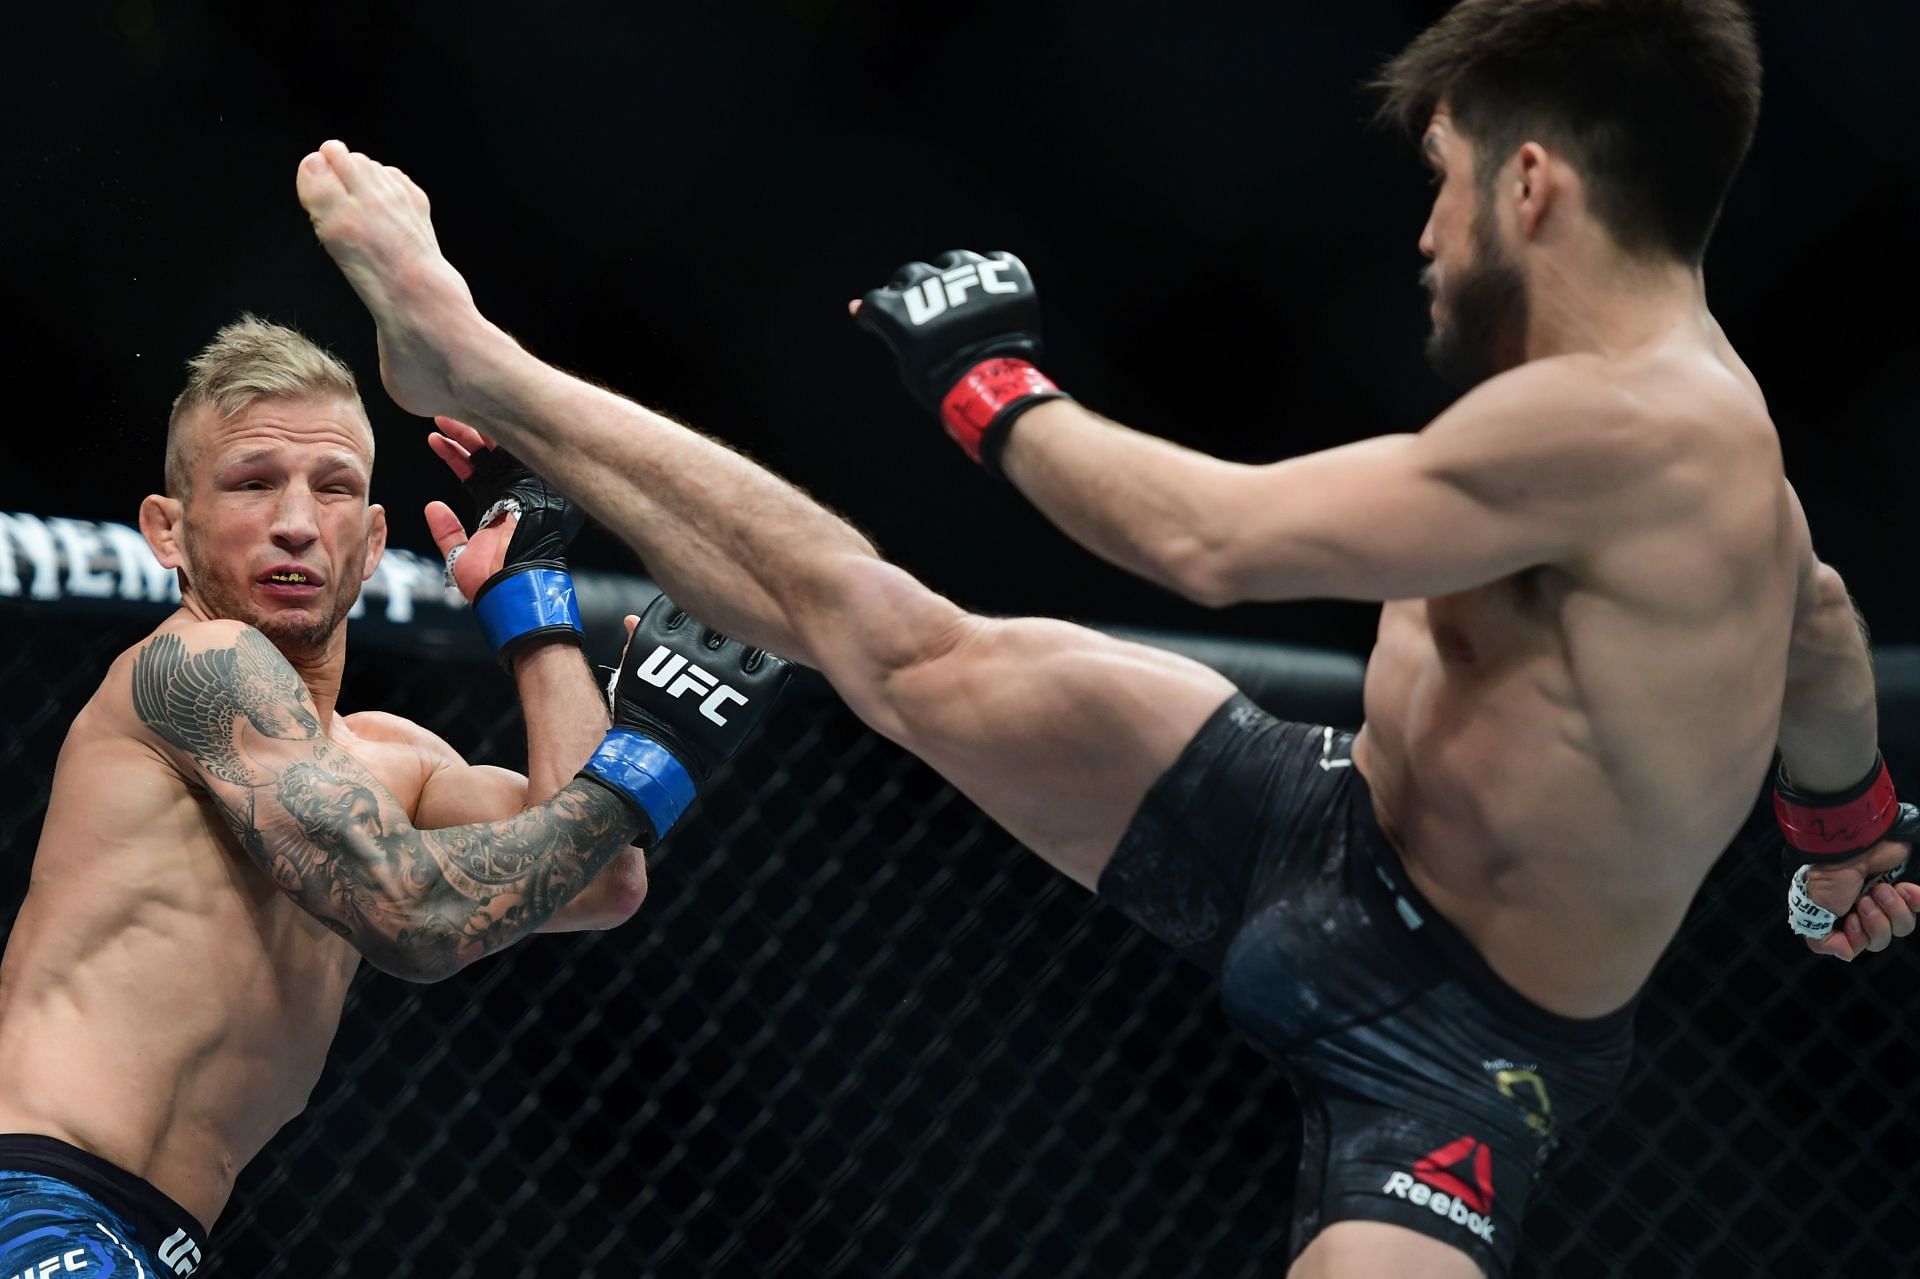 TJ Dillashaw has claimed he was drained by a drastic weight cut in his loss to Henry Cejudo